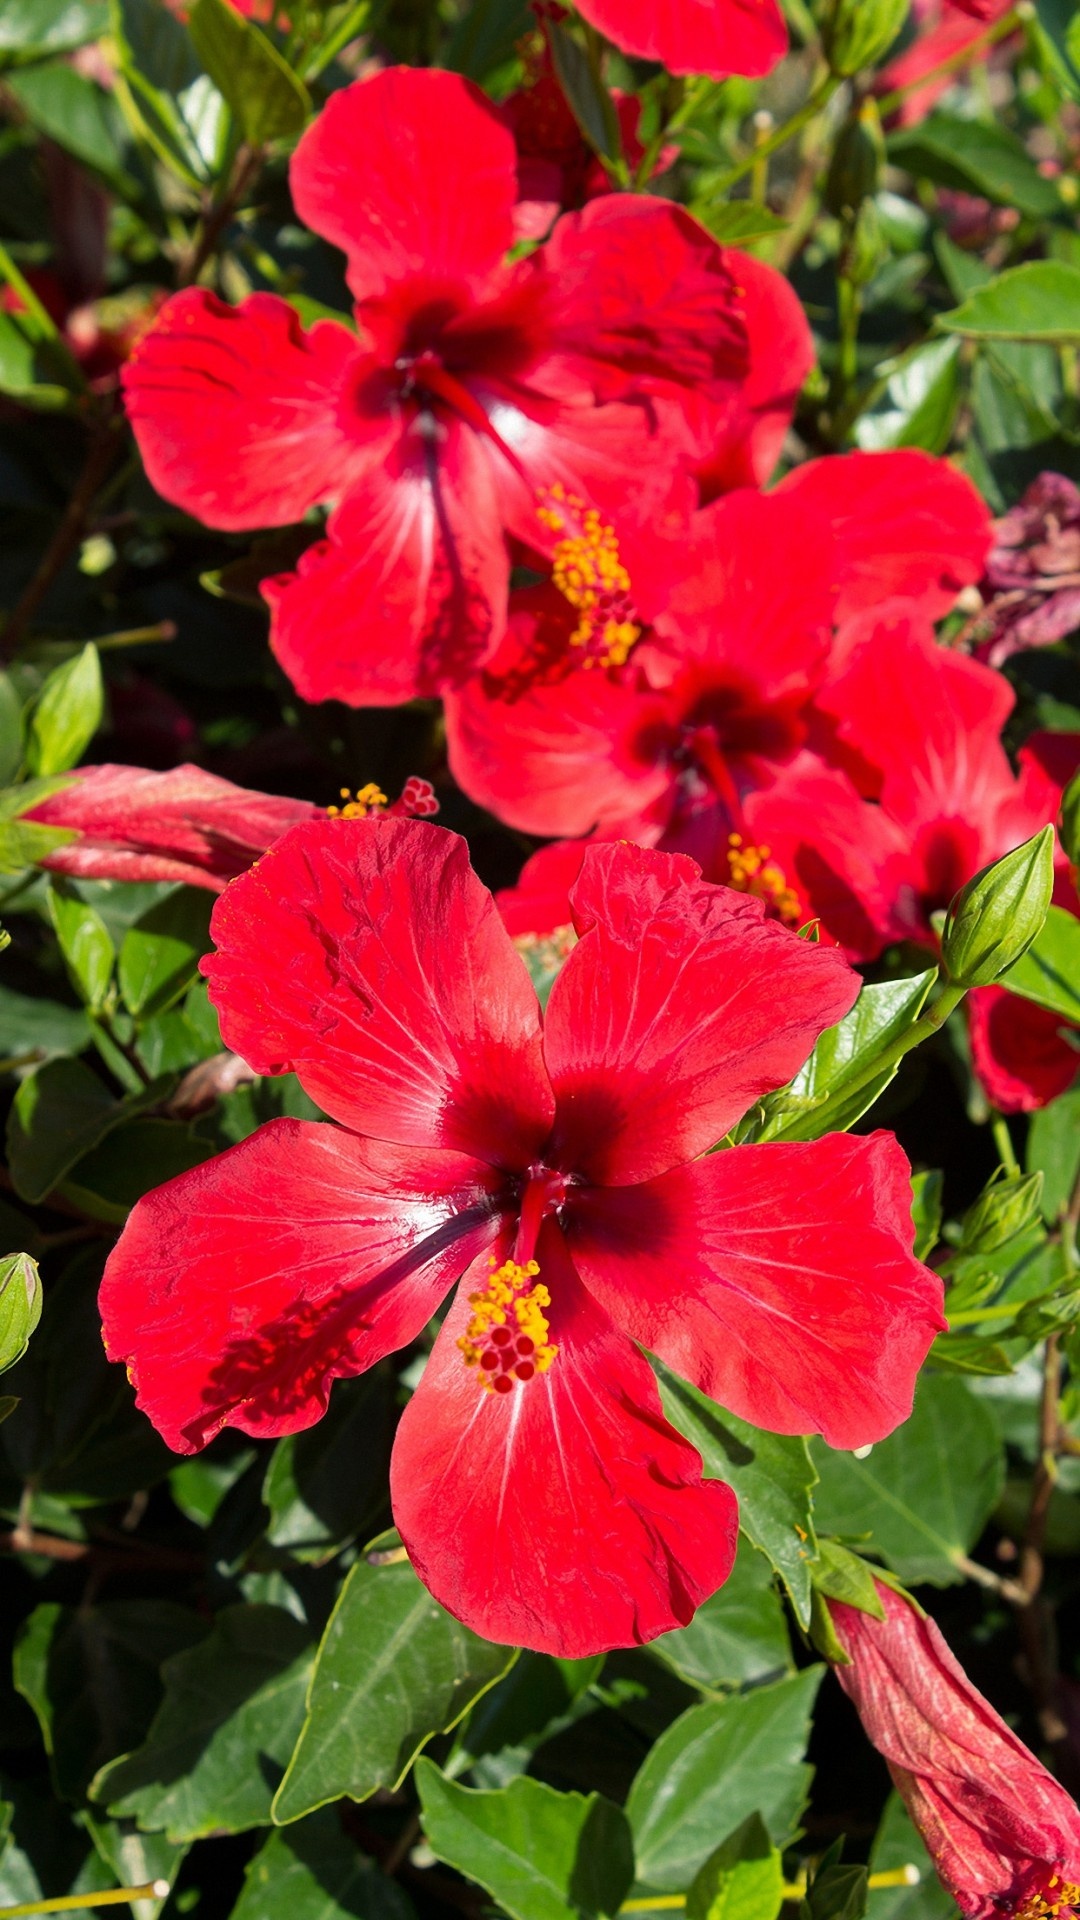 Hibiscus wallpapers, Desktop background, Floral delight, Nature's beauty, 1080x1920 Full HD Phone